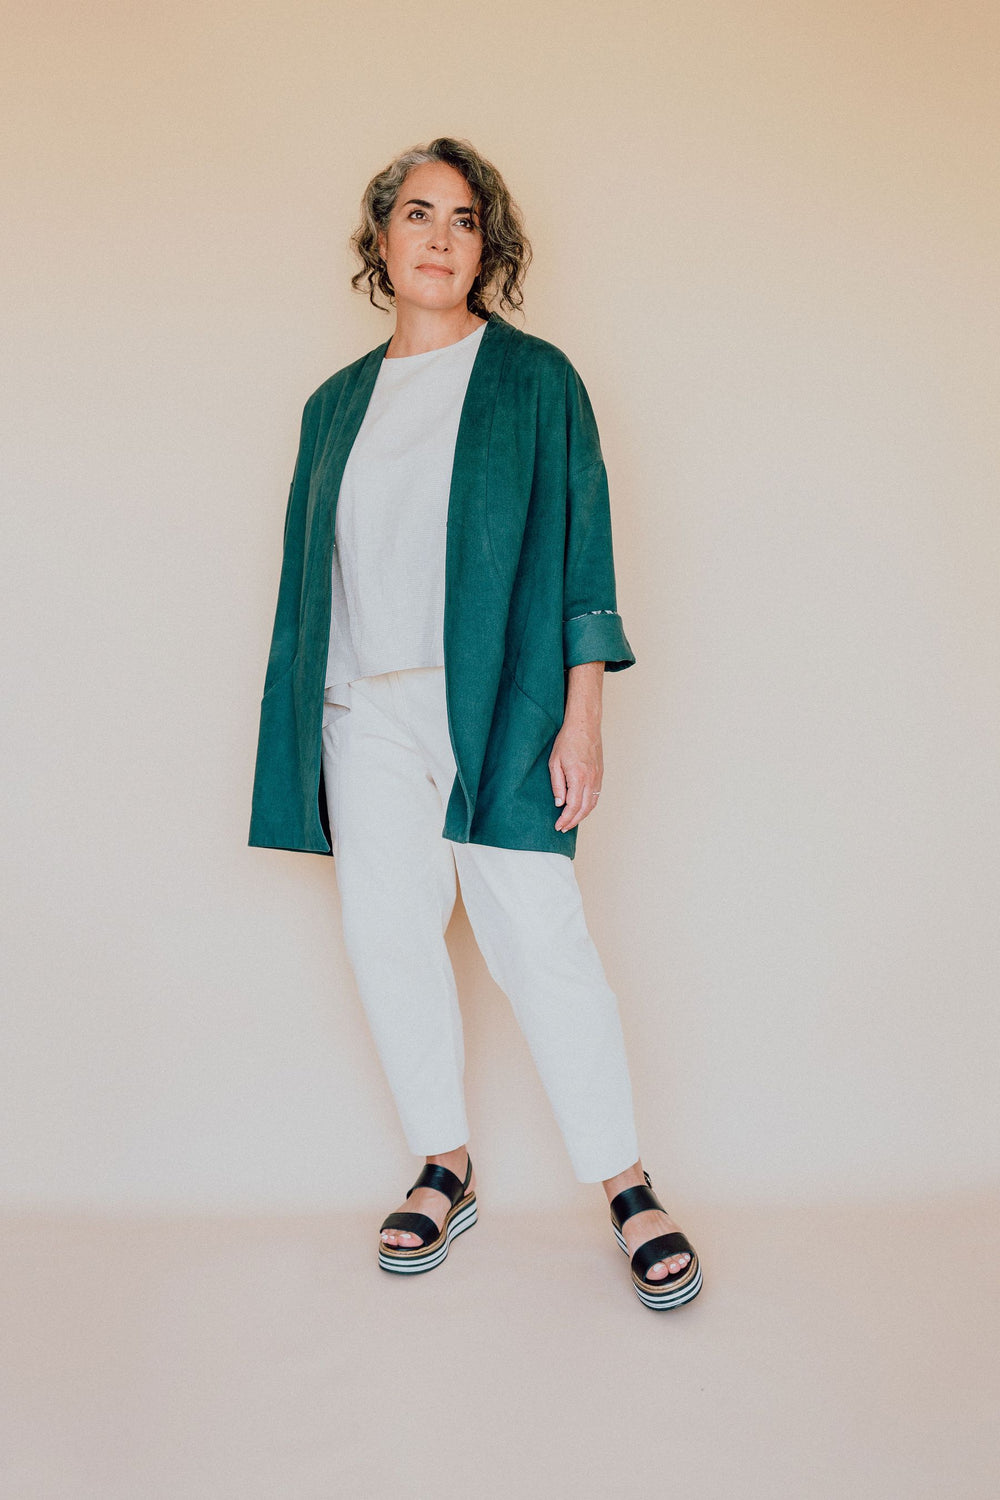 Woman wearing the Flynn Jacket pattern from In the Folds on The Fold Line. A jacket pattern made in denim, cottons canvas, drill or heavyweight linen fabrics, featuring a loose fitting silhouette, drop shoulder, wrap round collar, inverted box-pleat in th